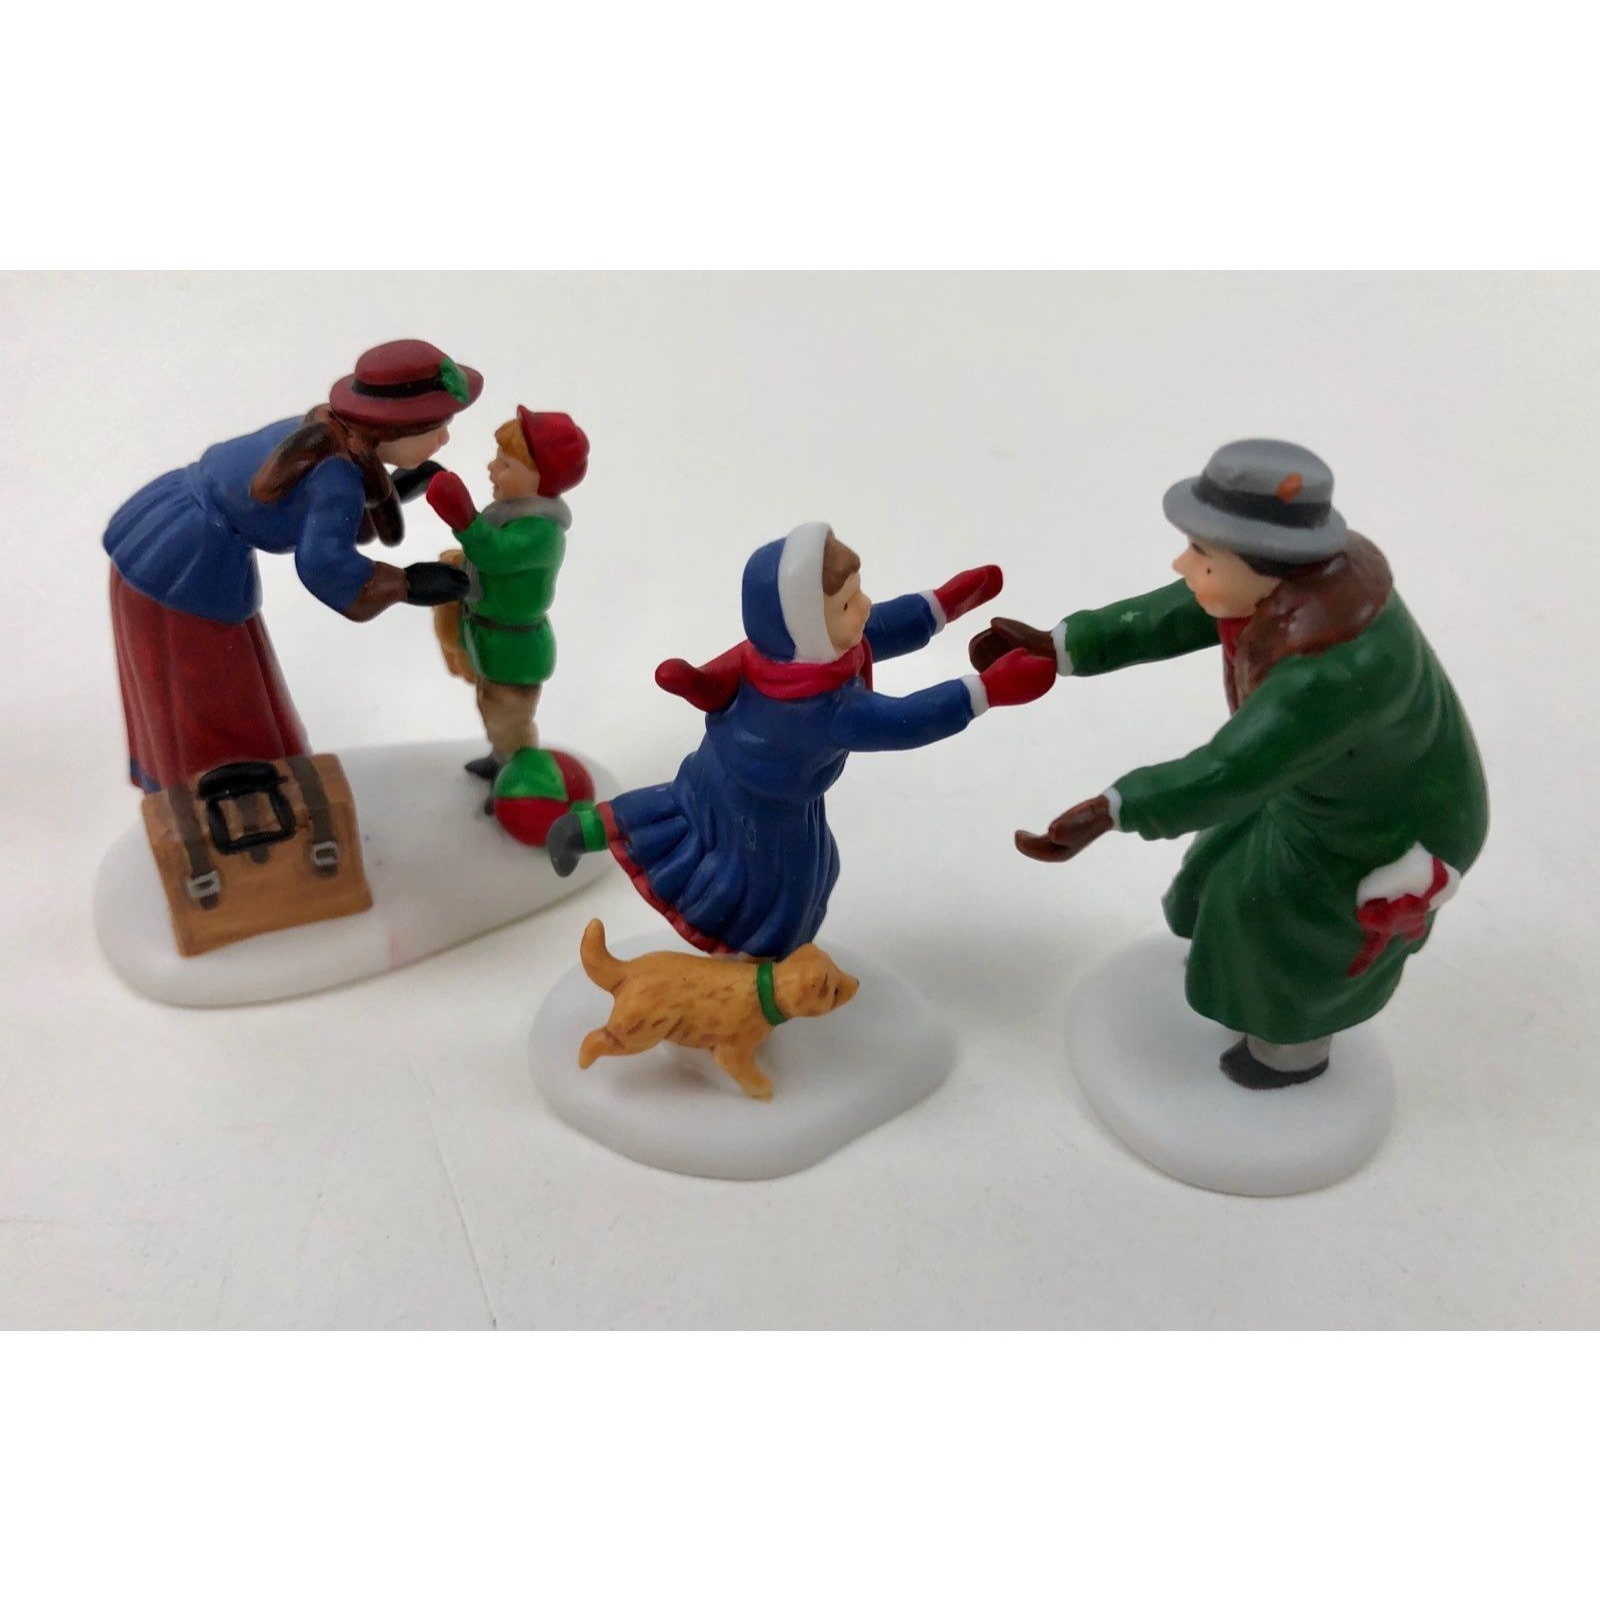 Department 56 Christmas Pudding Costermonger 58408 Dickens Village Figures 1997